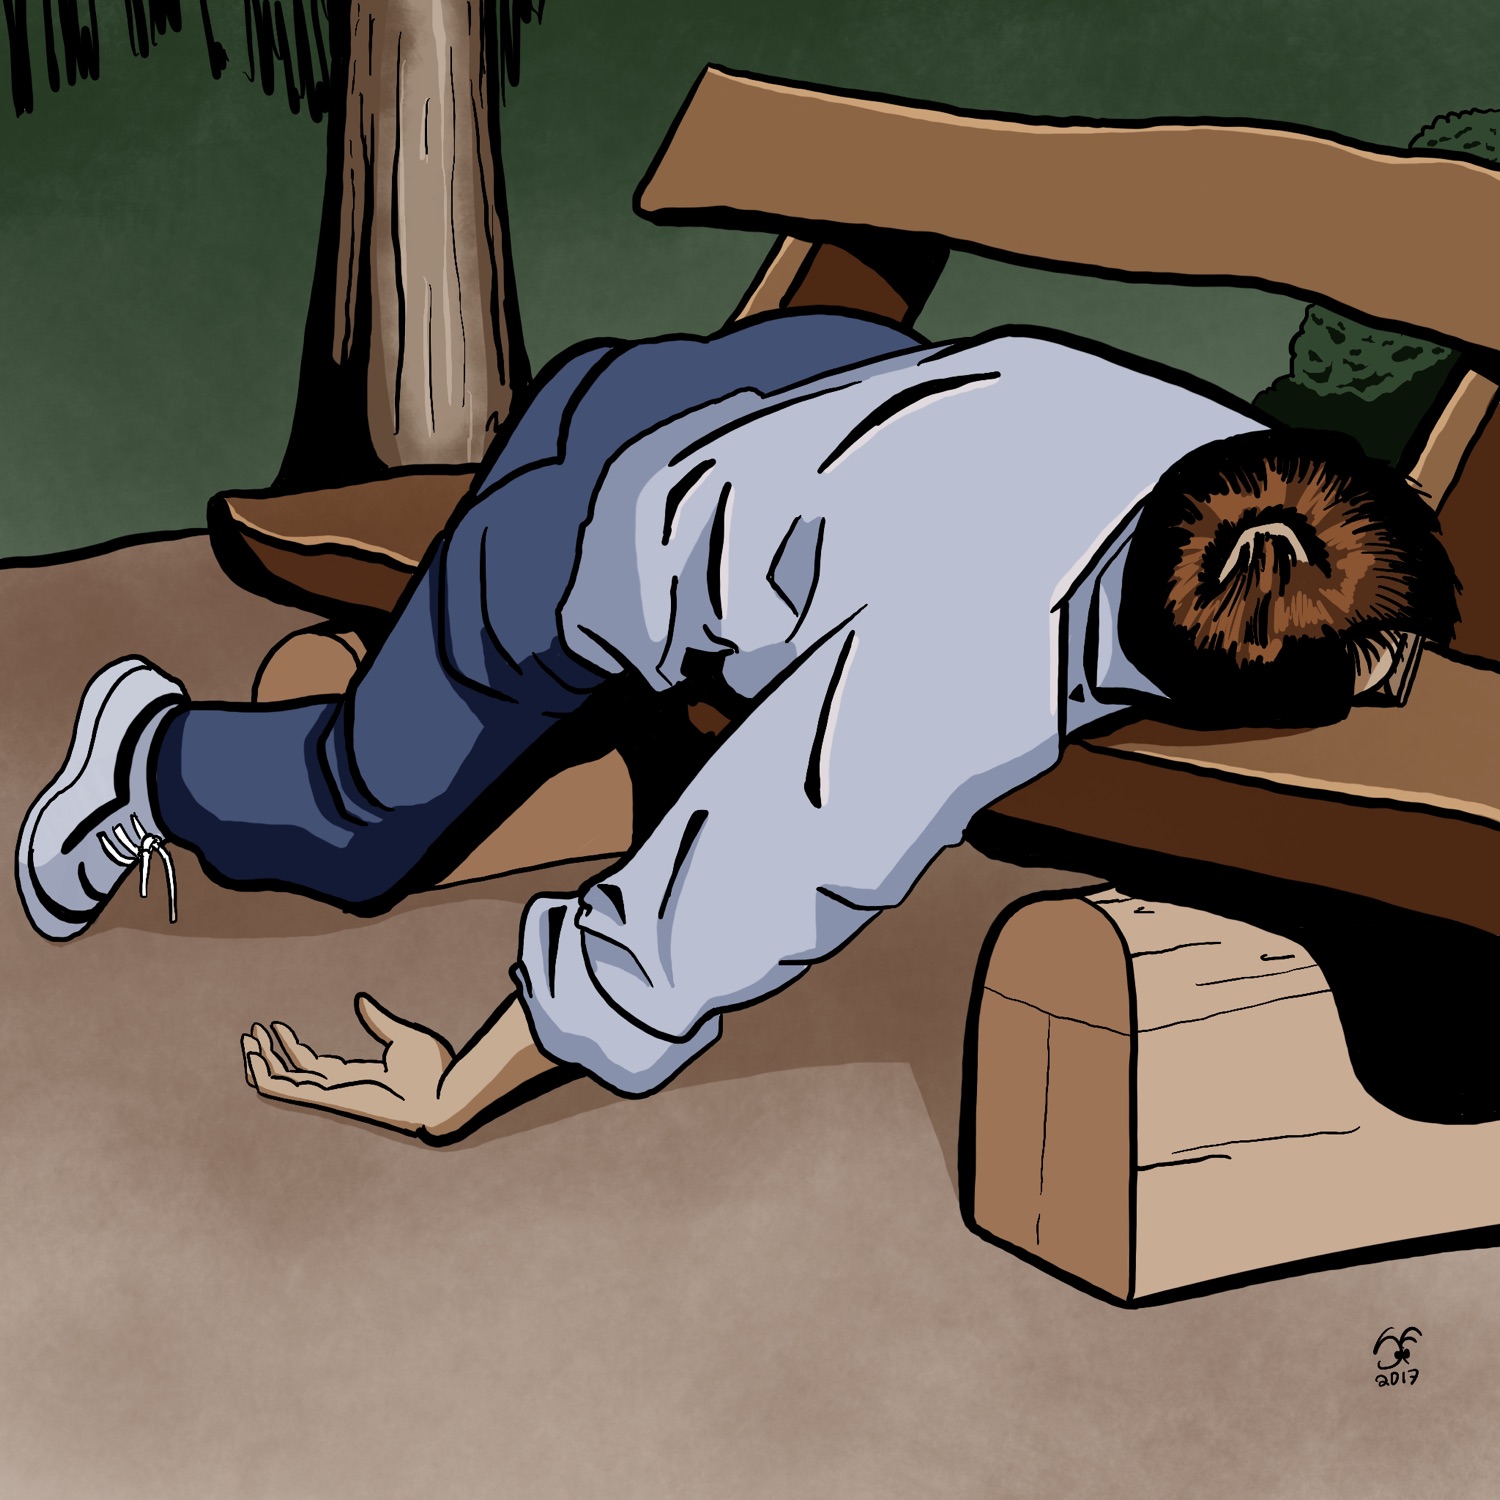 An illustration, based on a reference image, of a dude passed out on a park bench